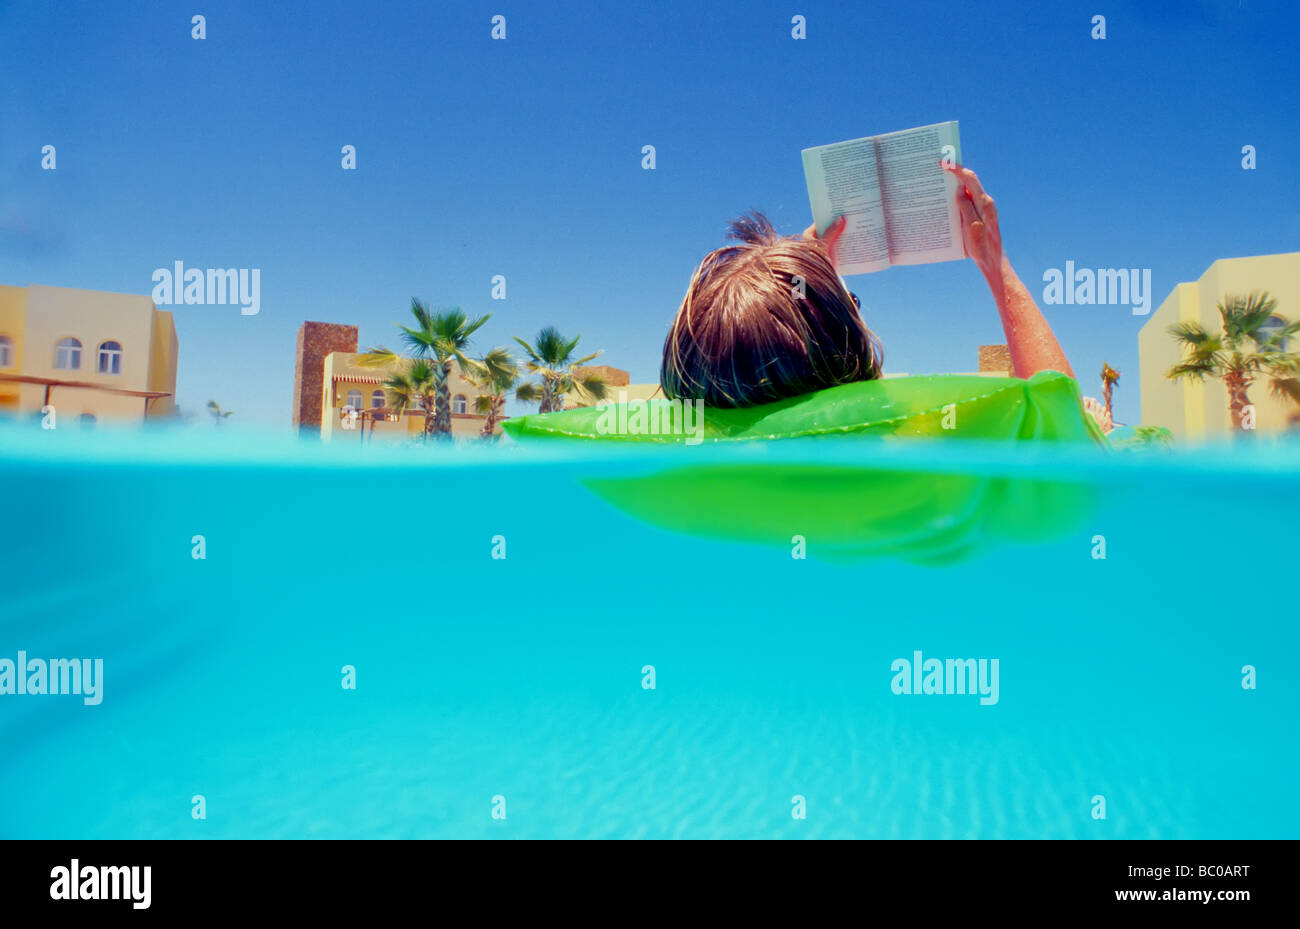 woman 40 floating on inflatable airbed on clear blue water swimming pool reading a book palm trees background Stock Photo